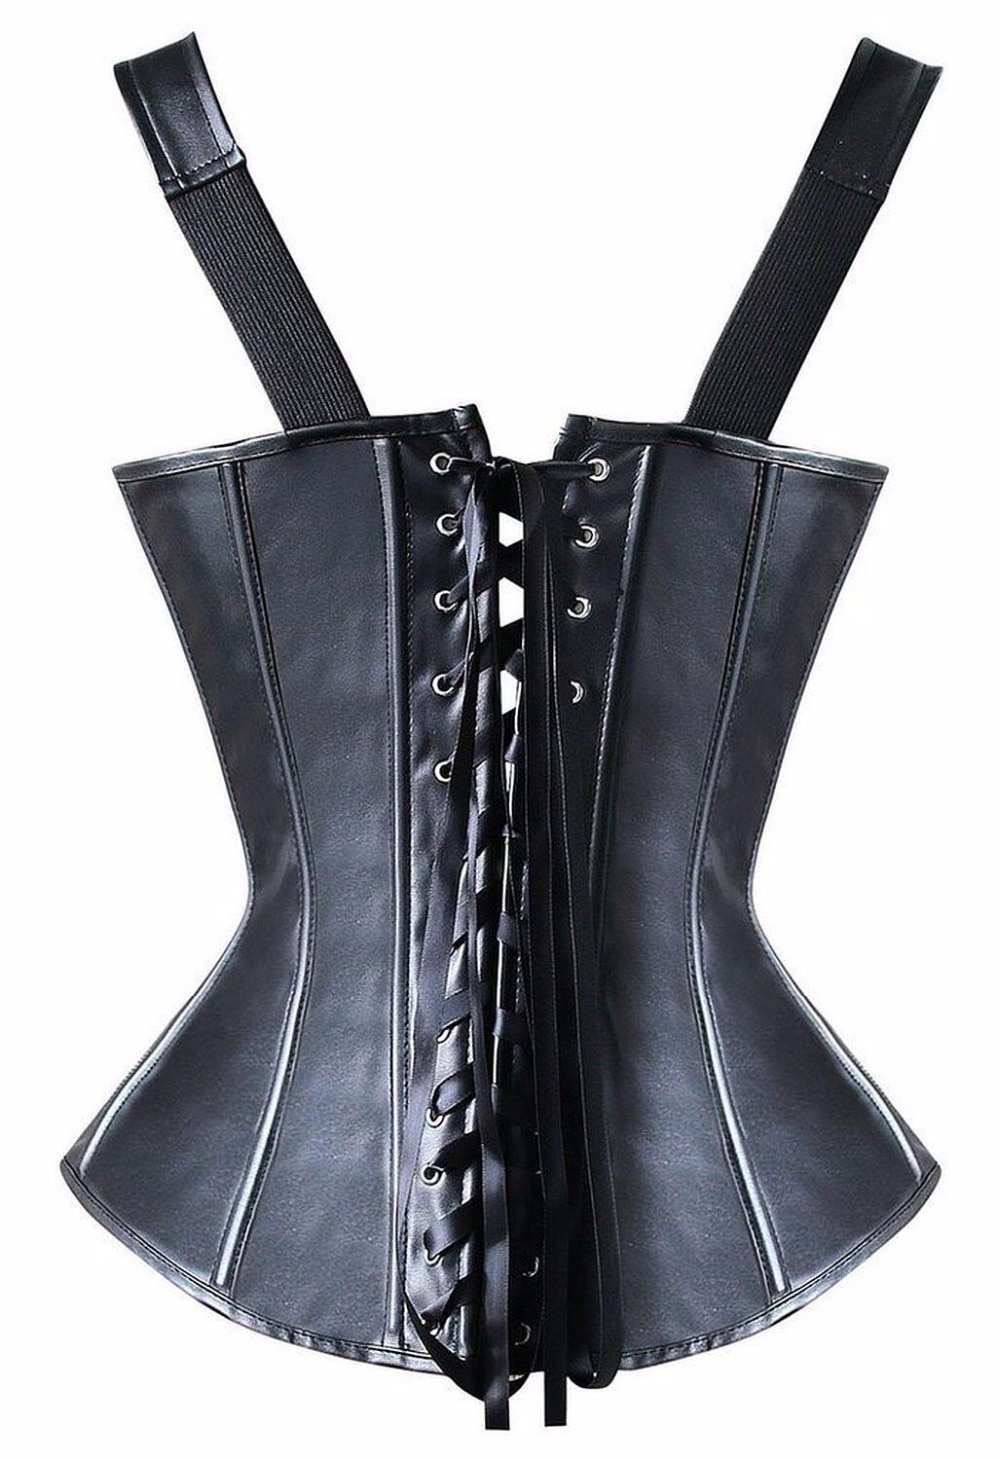 Women Halloween Sexy Slimming Waist Trainer Cincher Corset Lace Up Overbust Bustier Top Steampunk Role-Playing Dress Plus Size